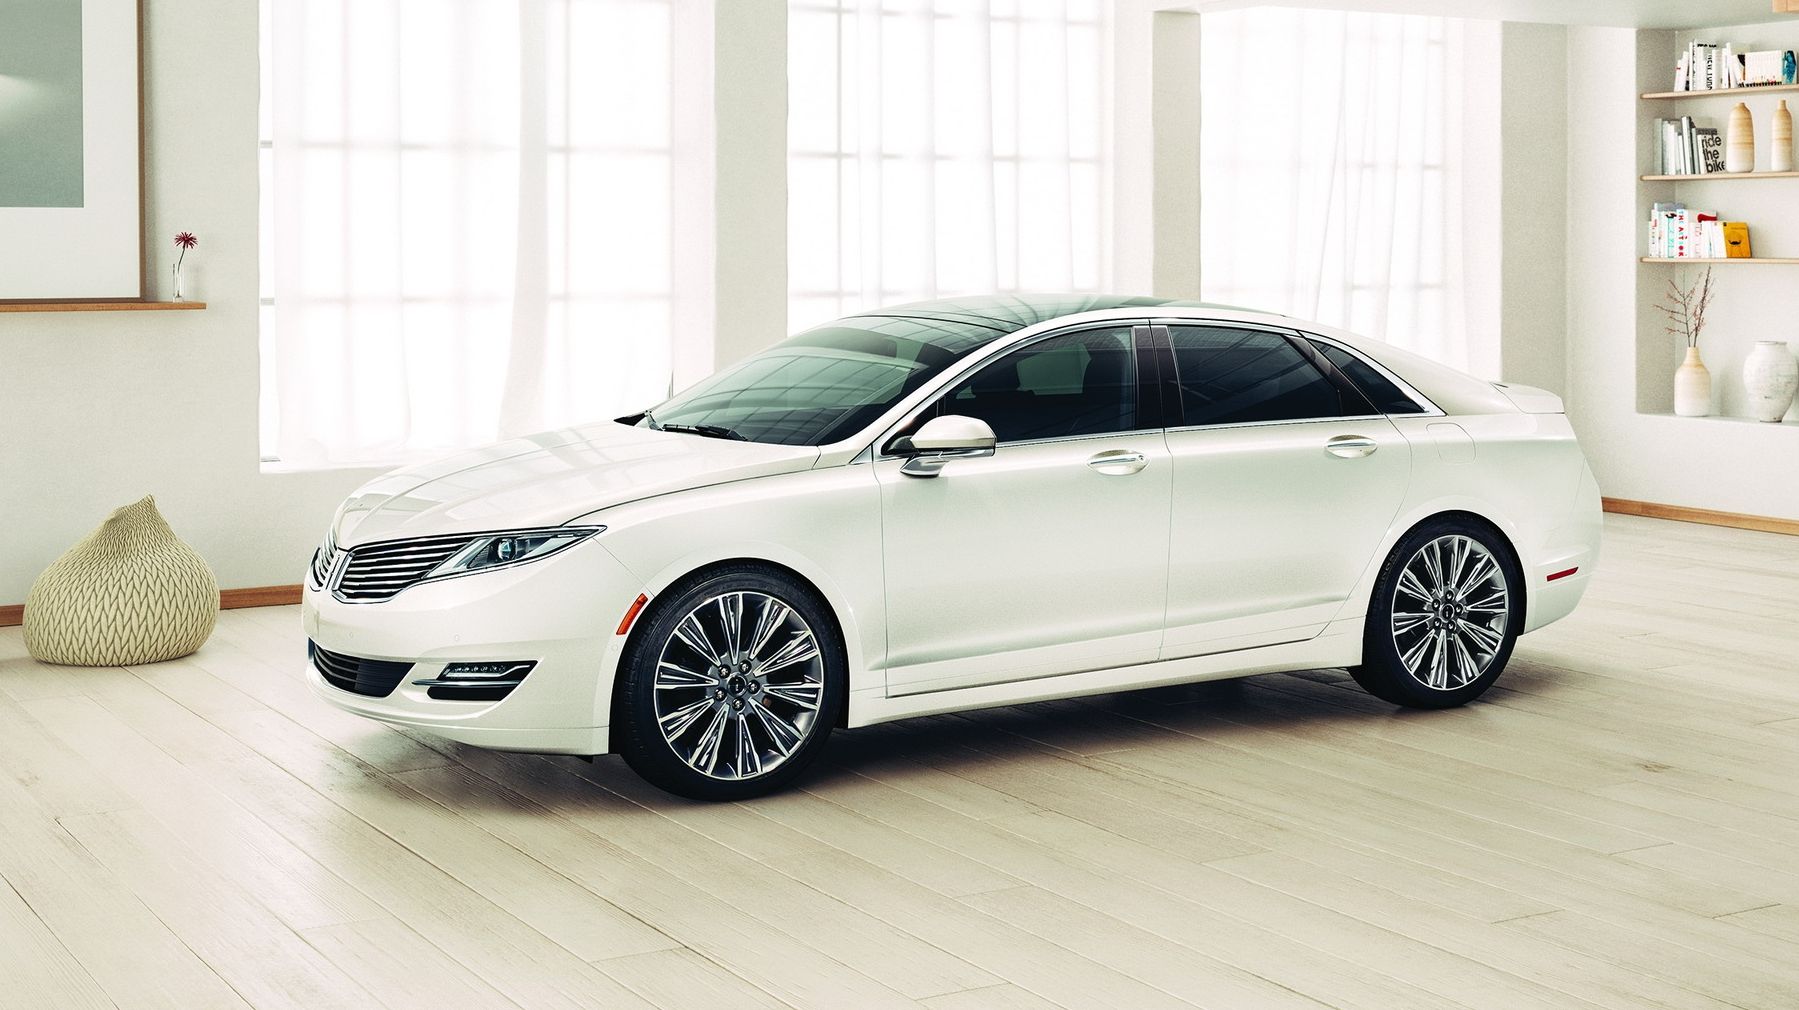  Lincoln has extended its Black Label packge to the MKZ.